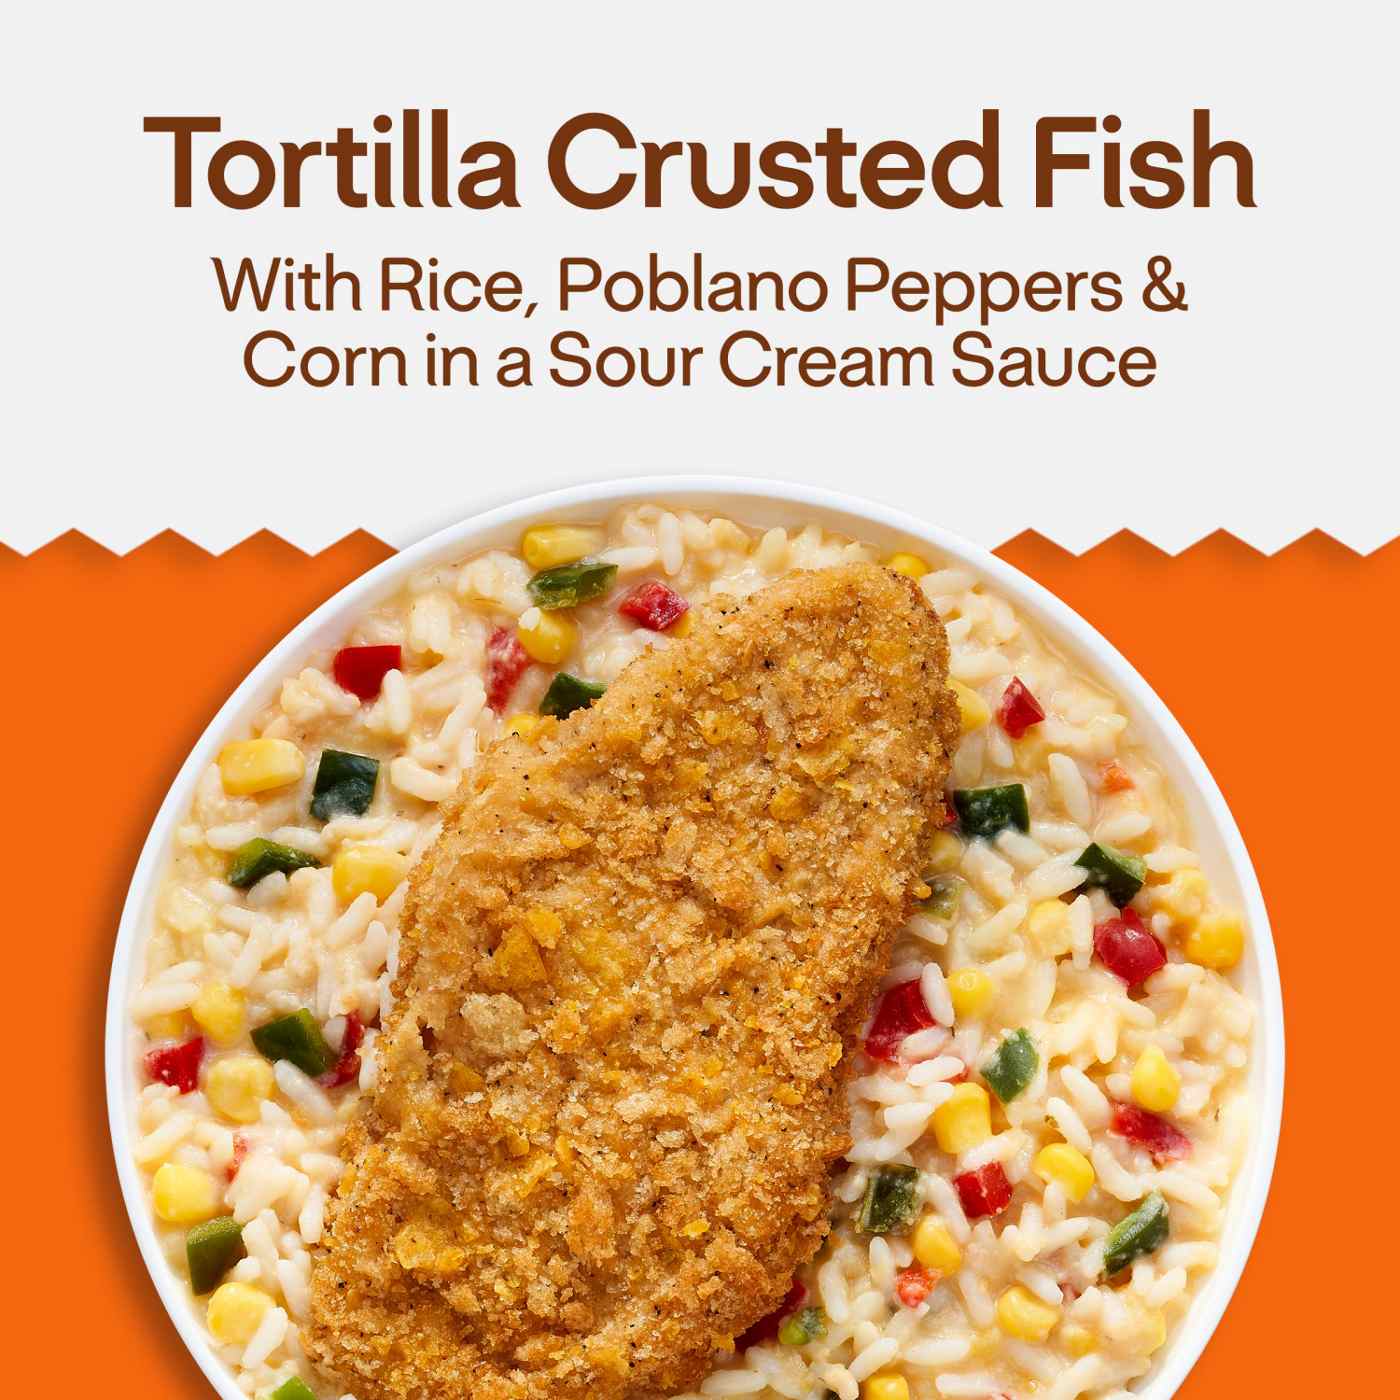 Lean Cuisine 15g Protein Tortilla Crusted Fish Frozen Meal; image 2 of 8